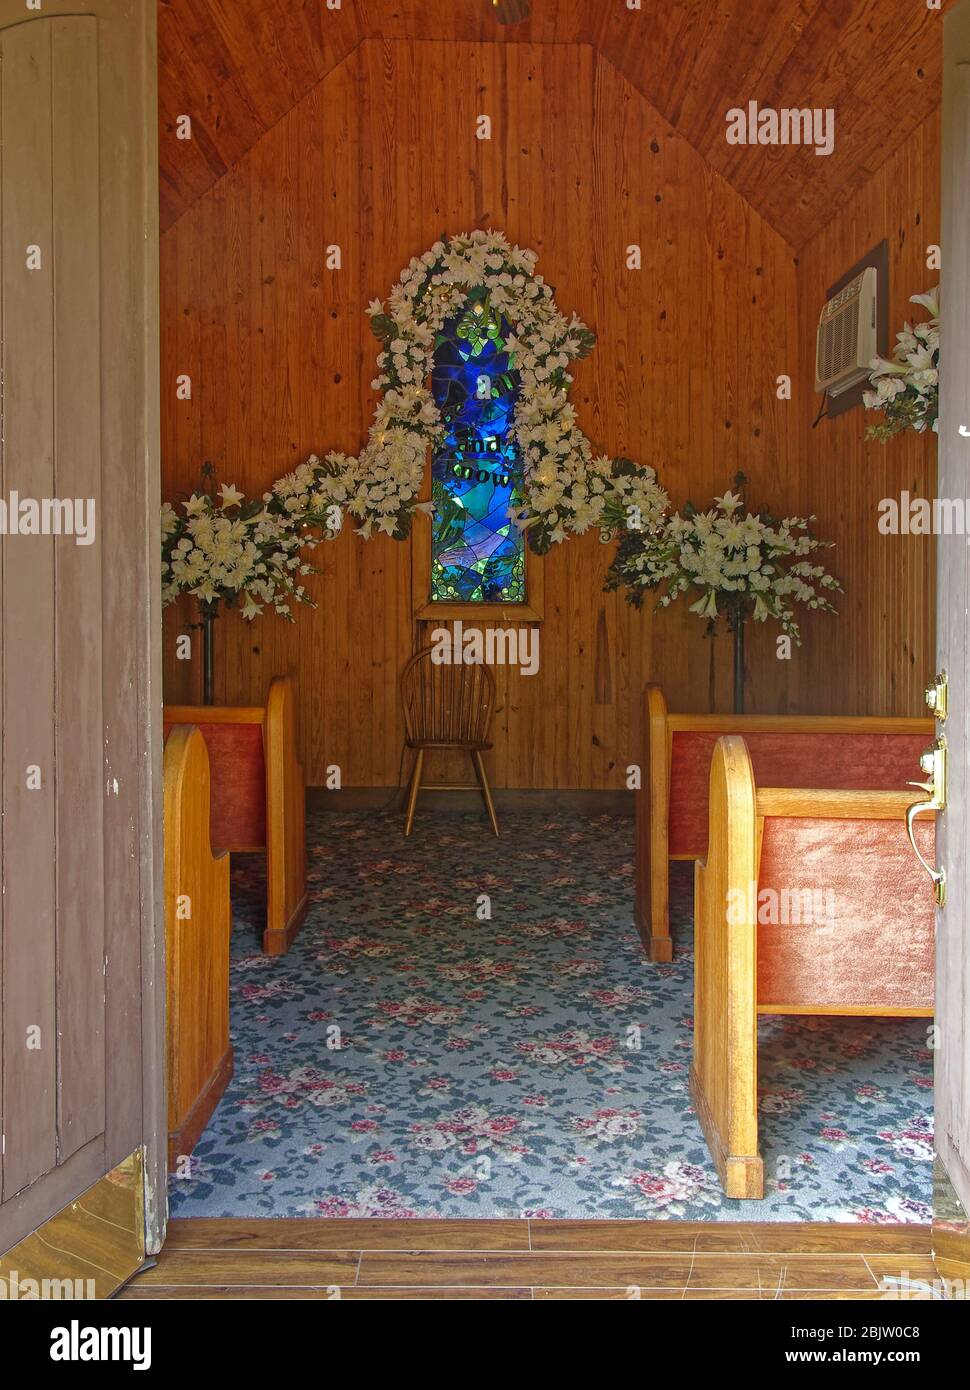 tiny chapel, interior, flower garland, stained glass window, 4 wood pews, wood paneling, flowered carpet, doors open, wedding venue, USA, KY, Kentucky Stock Photo